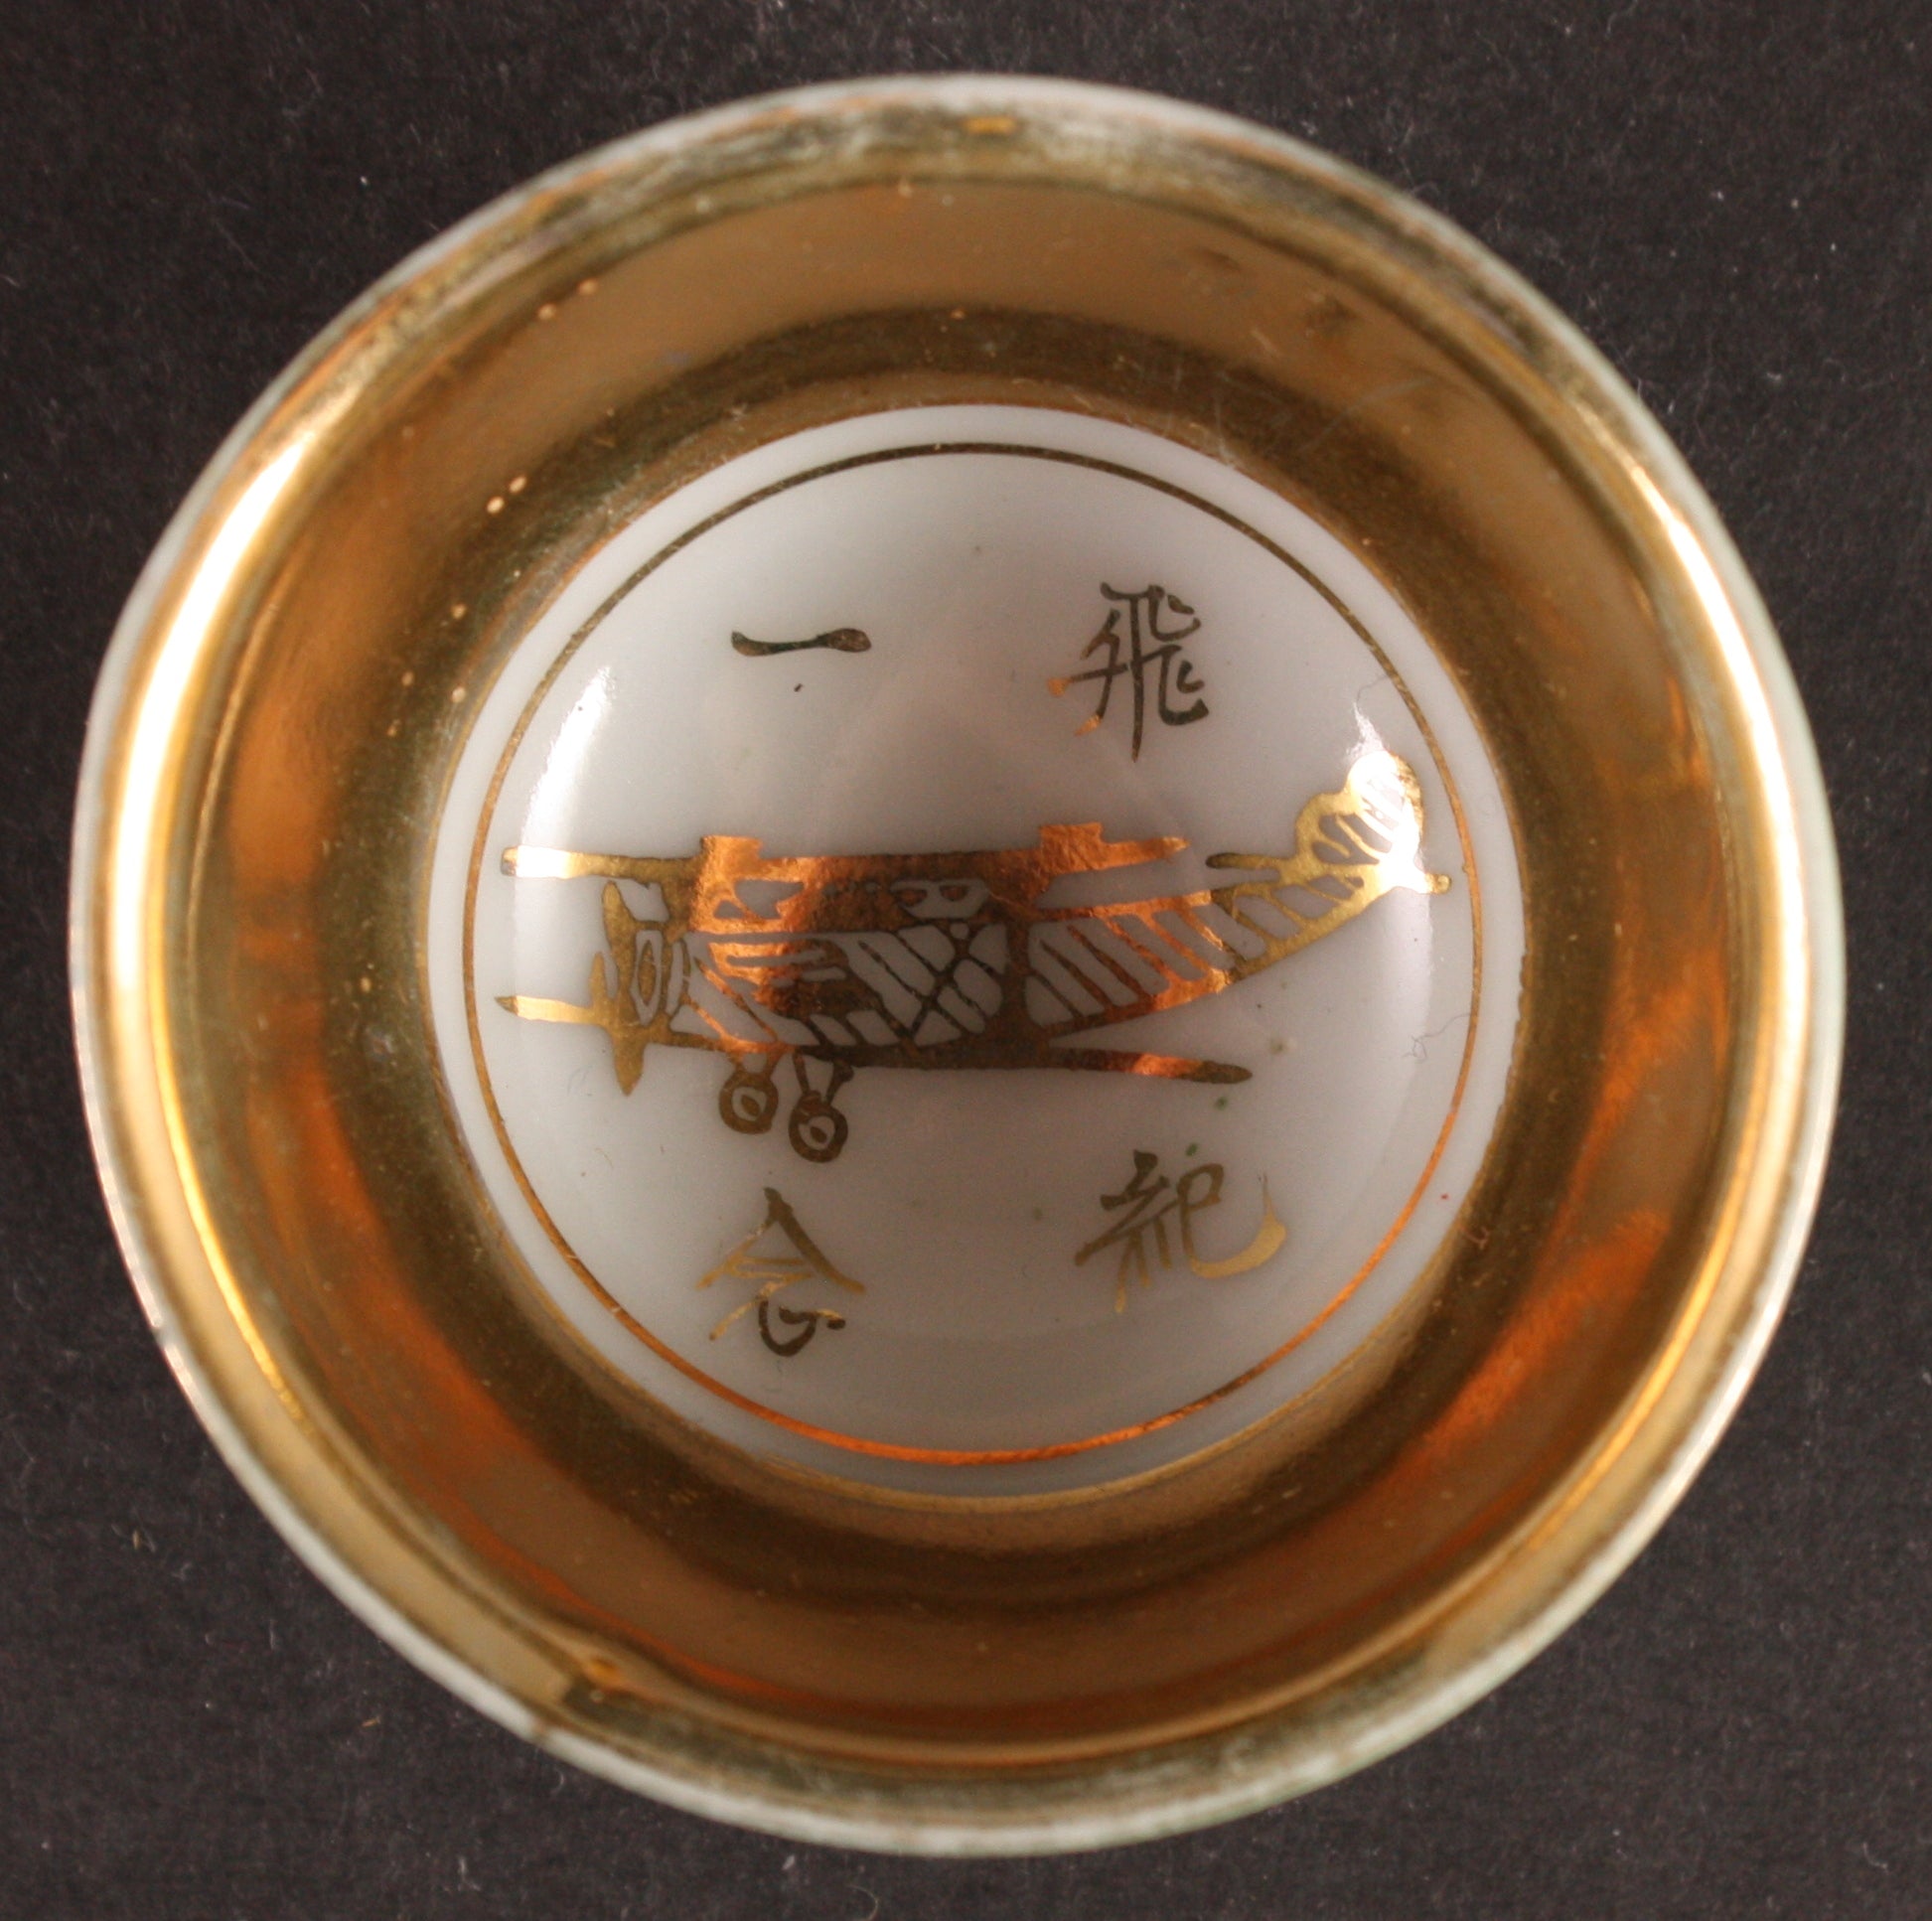 Antique Japanese Military Biplane 1st Air Regiment Army Sake Cup